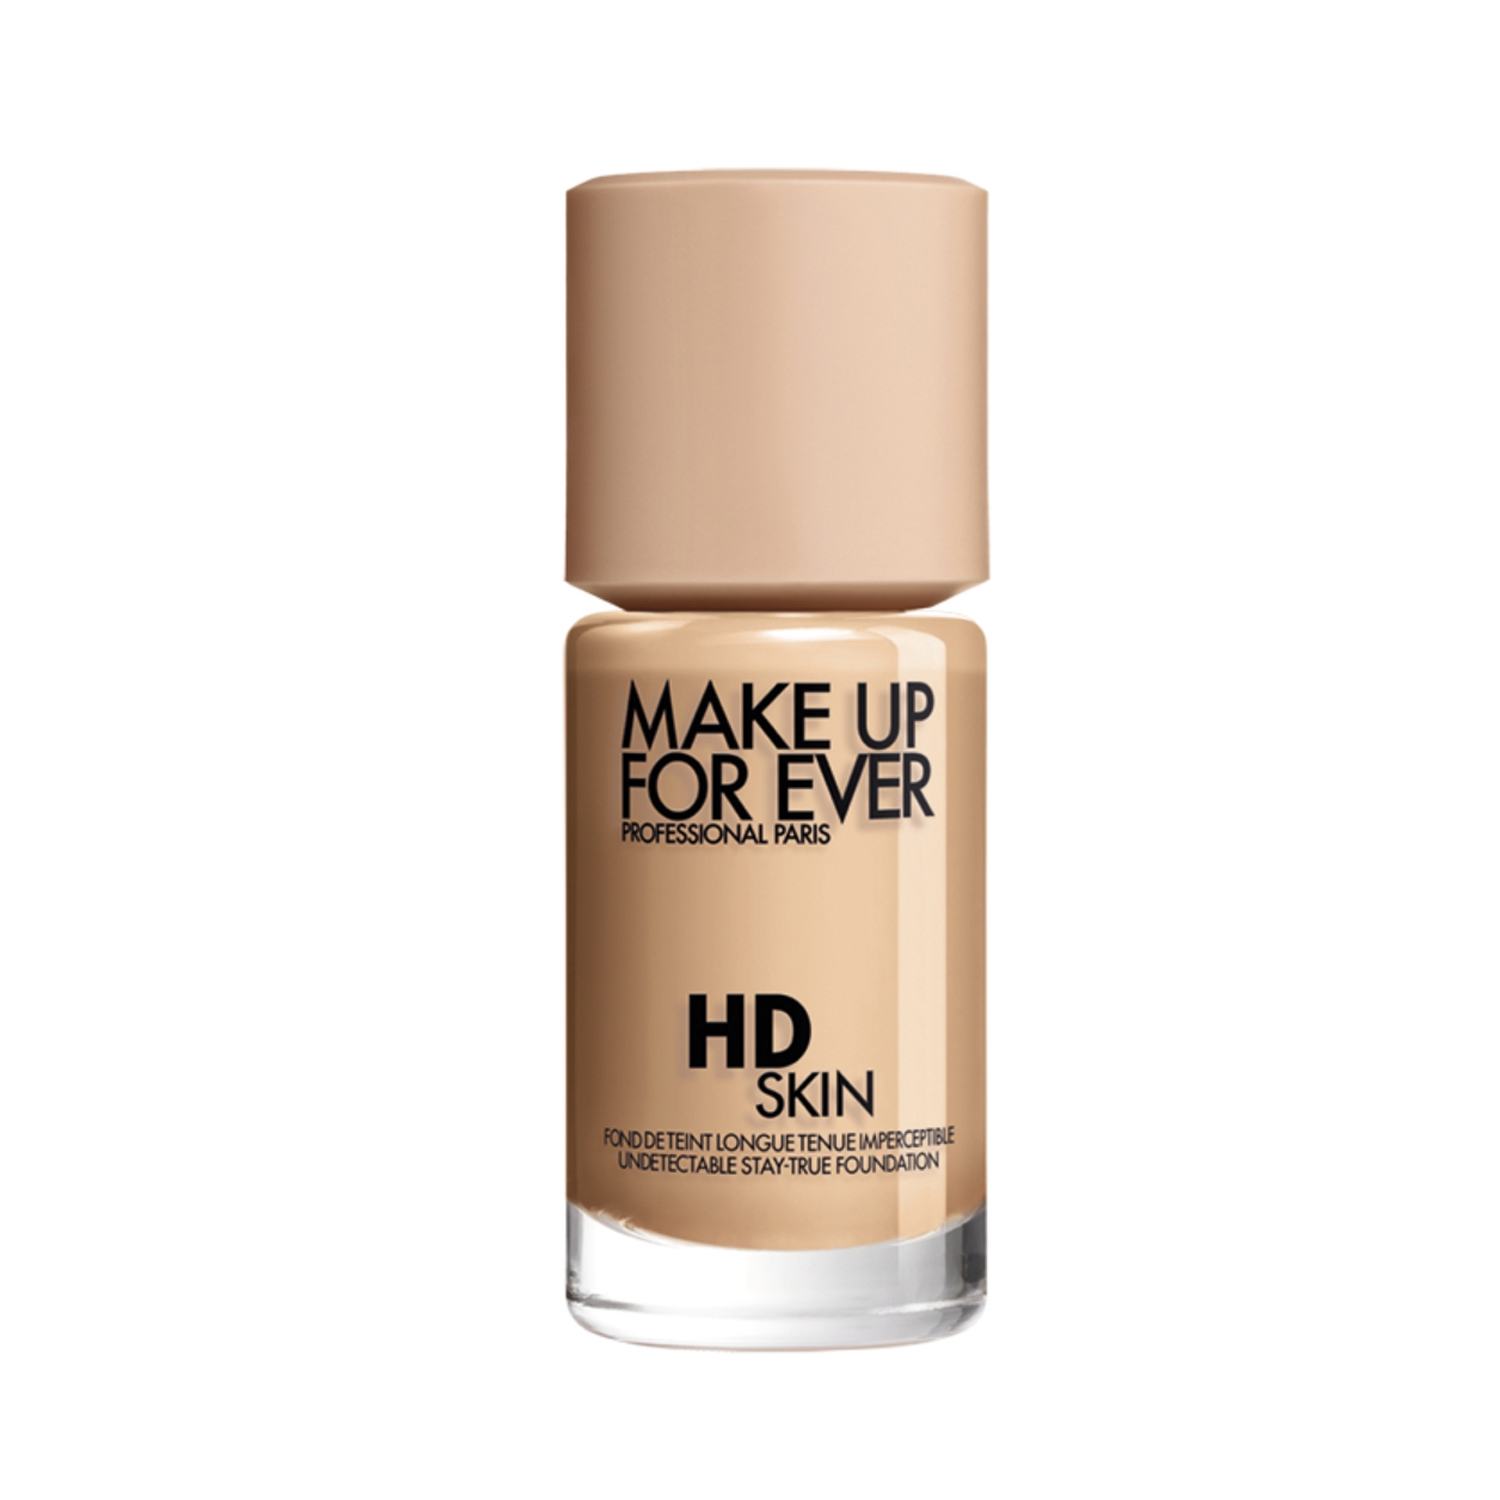 Make Up For Ever | Make Up For Ever Hd Skin Foundation-2Y20 (Y305) (30ml)